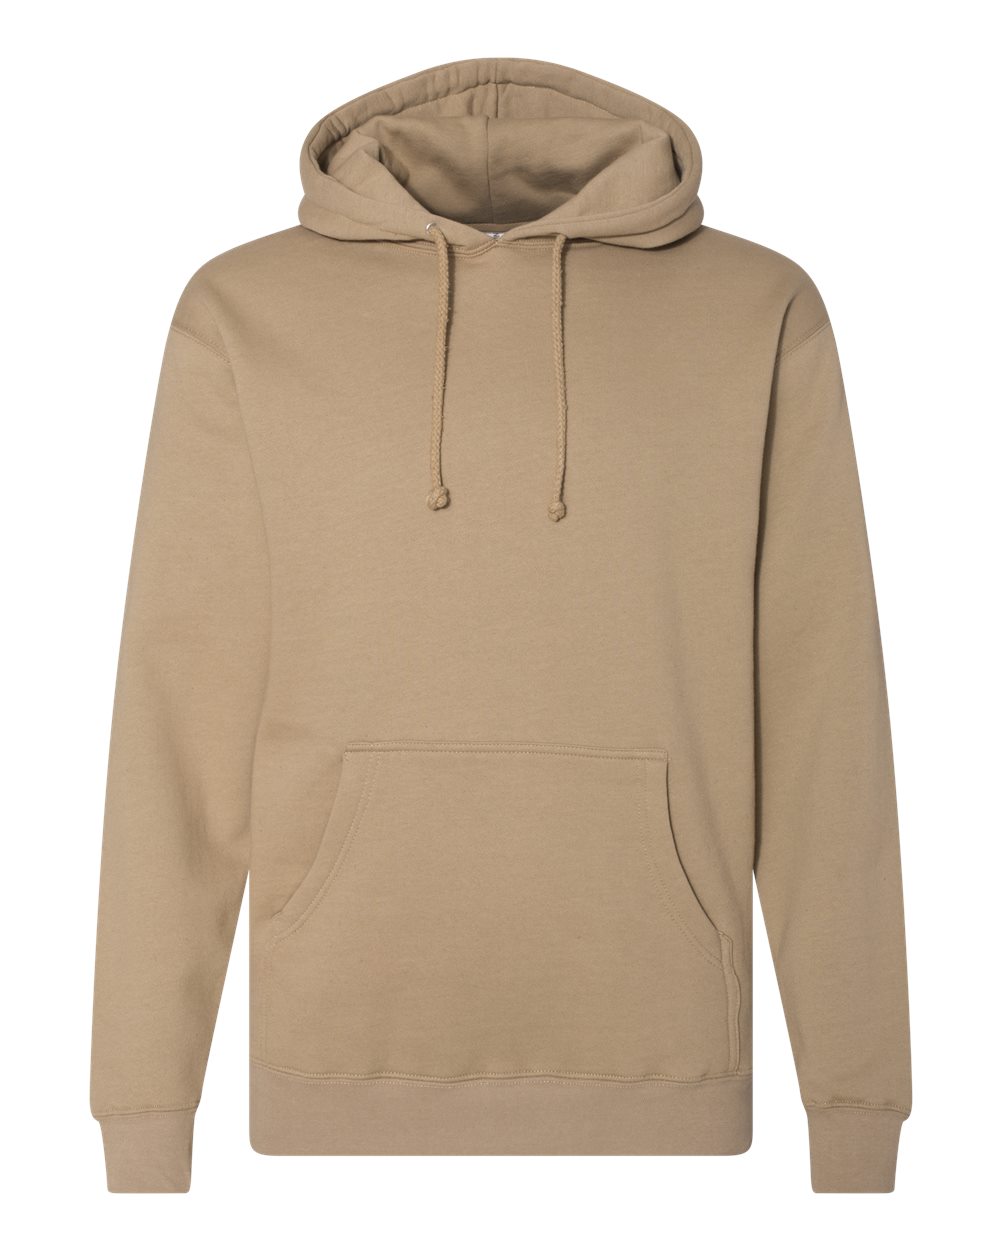 Independent Trading Co. IND4000 Heavyweight Hooded Sweatshirt–Sandstone (S)